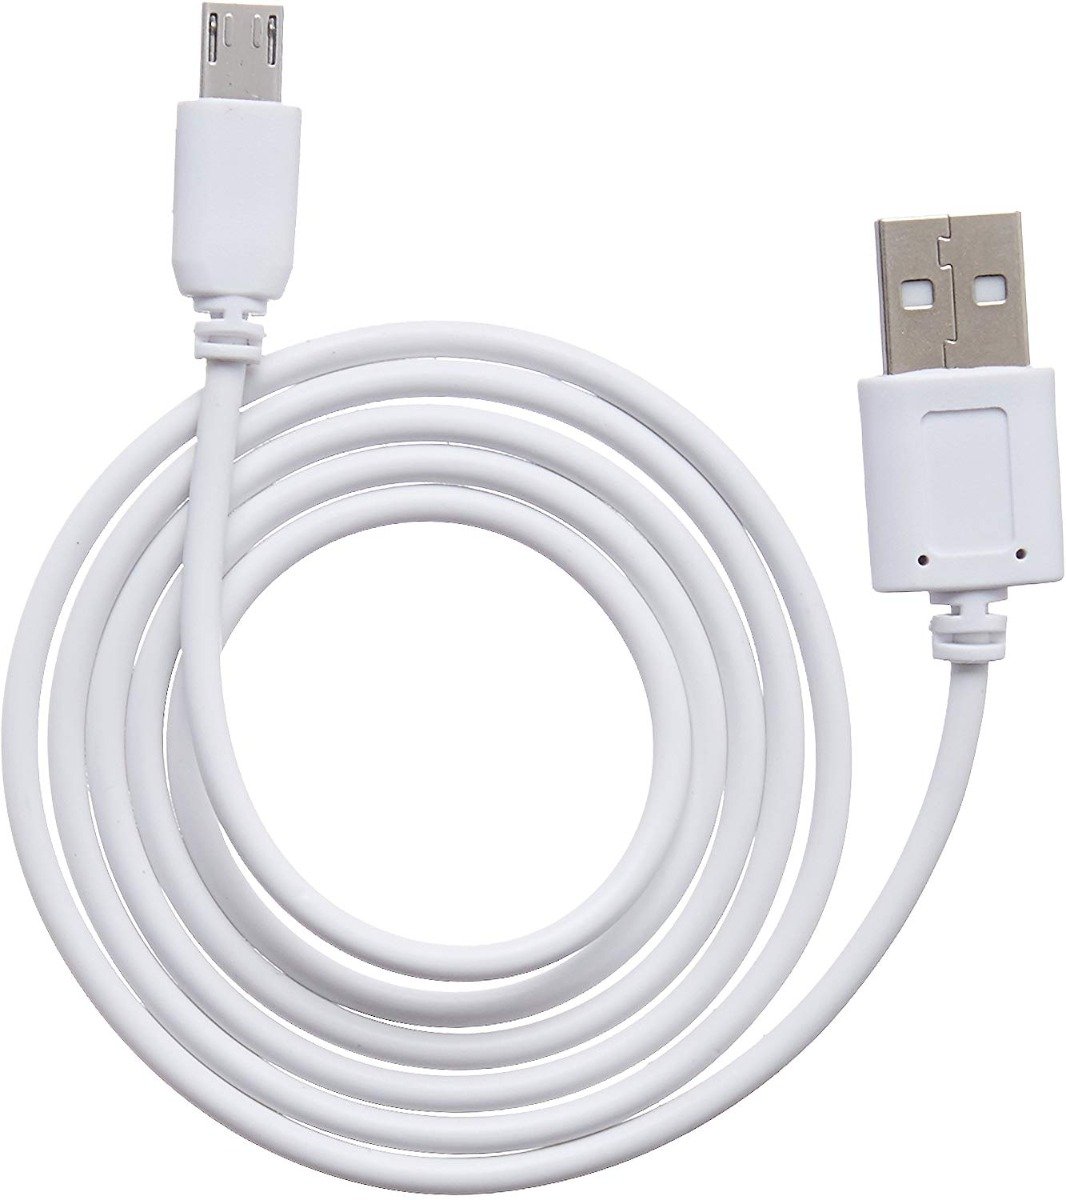 Micro USB 2M Data Cable for HTC / SAMSUNG / LG - WHITE